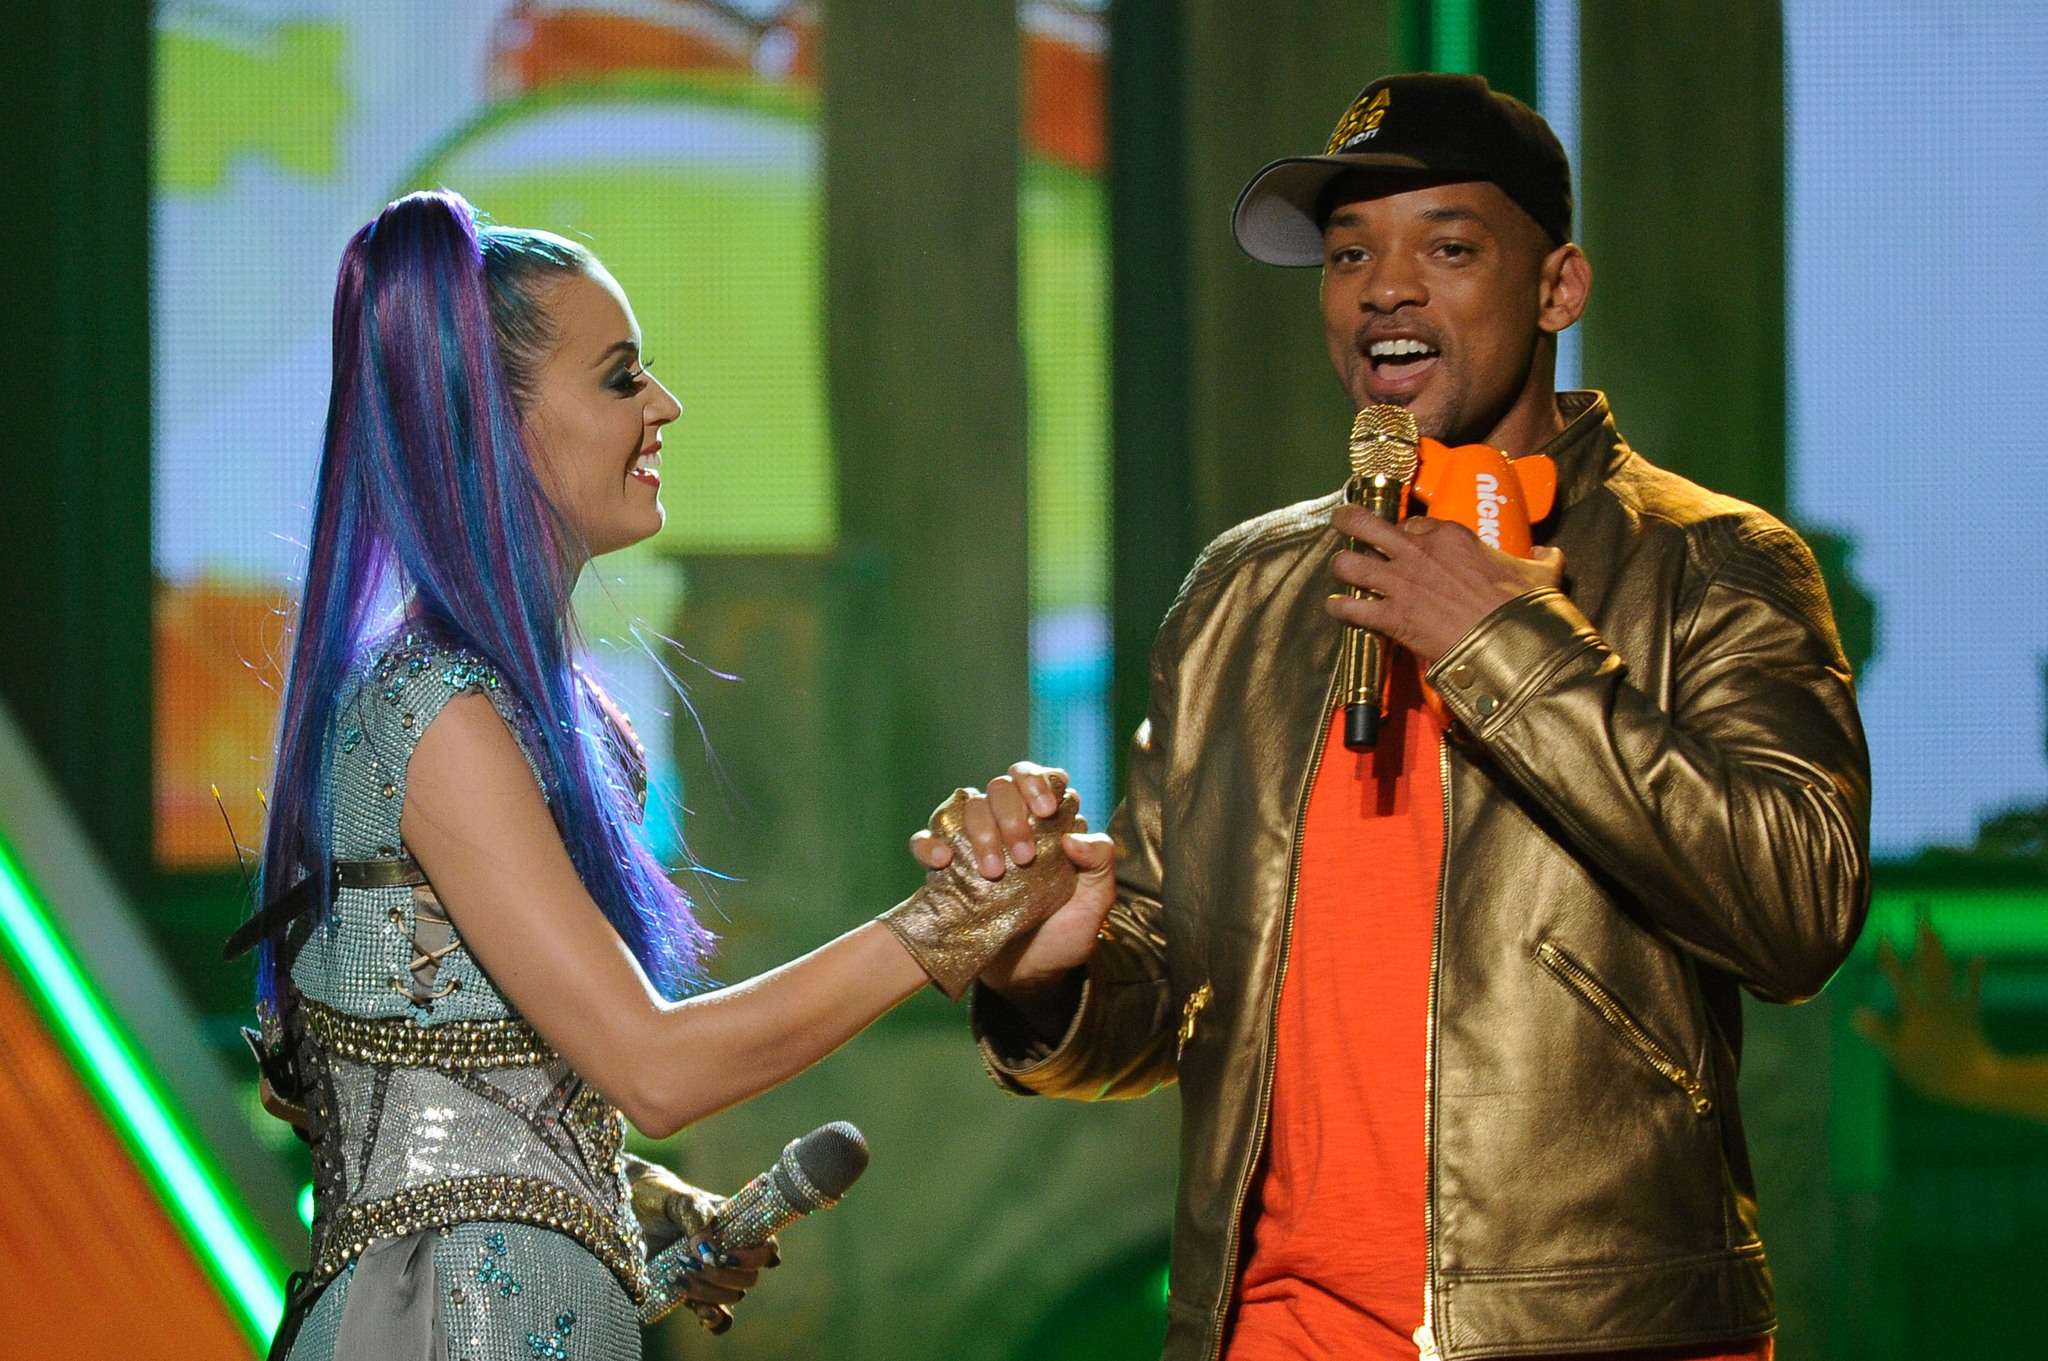 Will Smith and Katy Perry